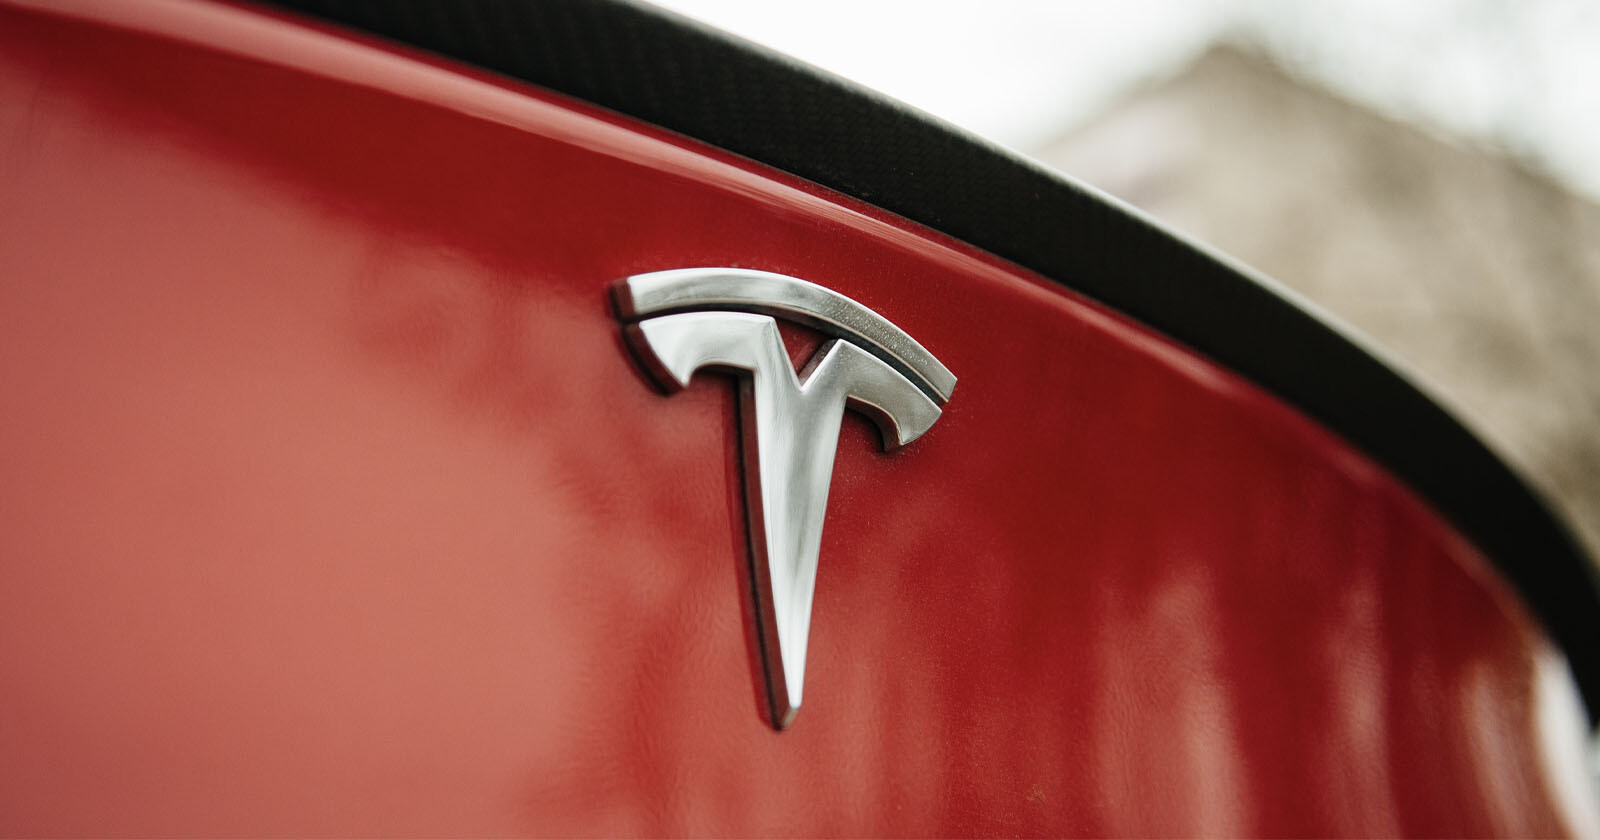 Tesla Sued Over Report Employees Shared Private Car Camera Footage